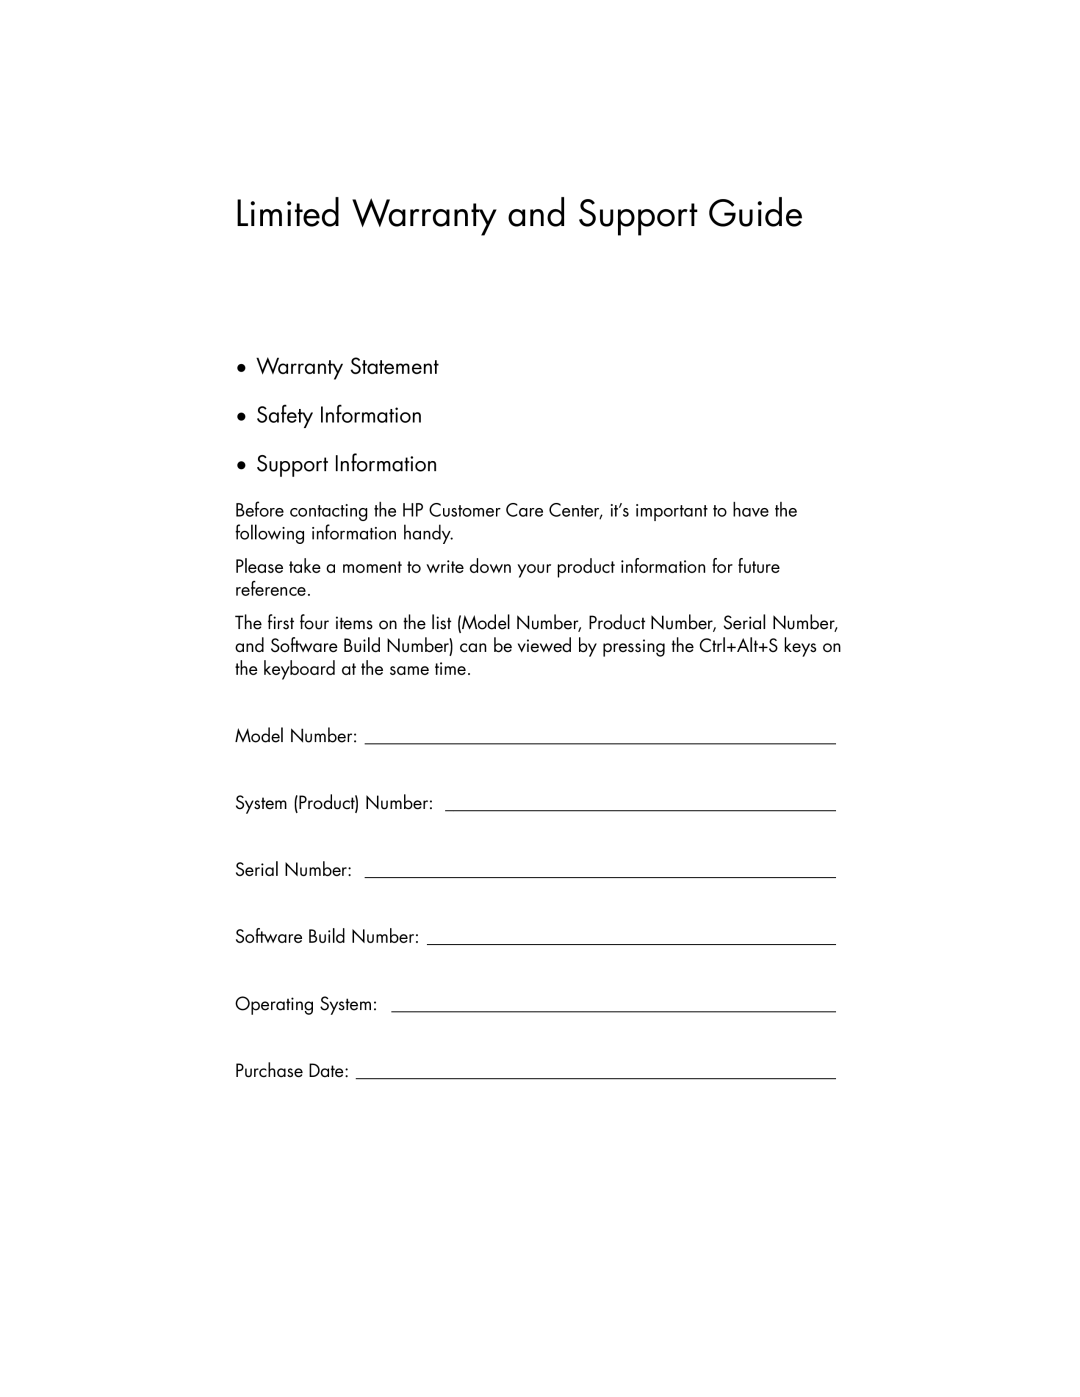 HP CQ5725F, CQ5720F, CQ5705P Limited Warranty and Support Guide, Warranty Statement Safety Information Support Information 